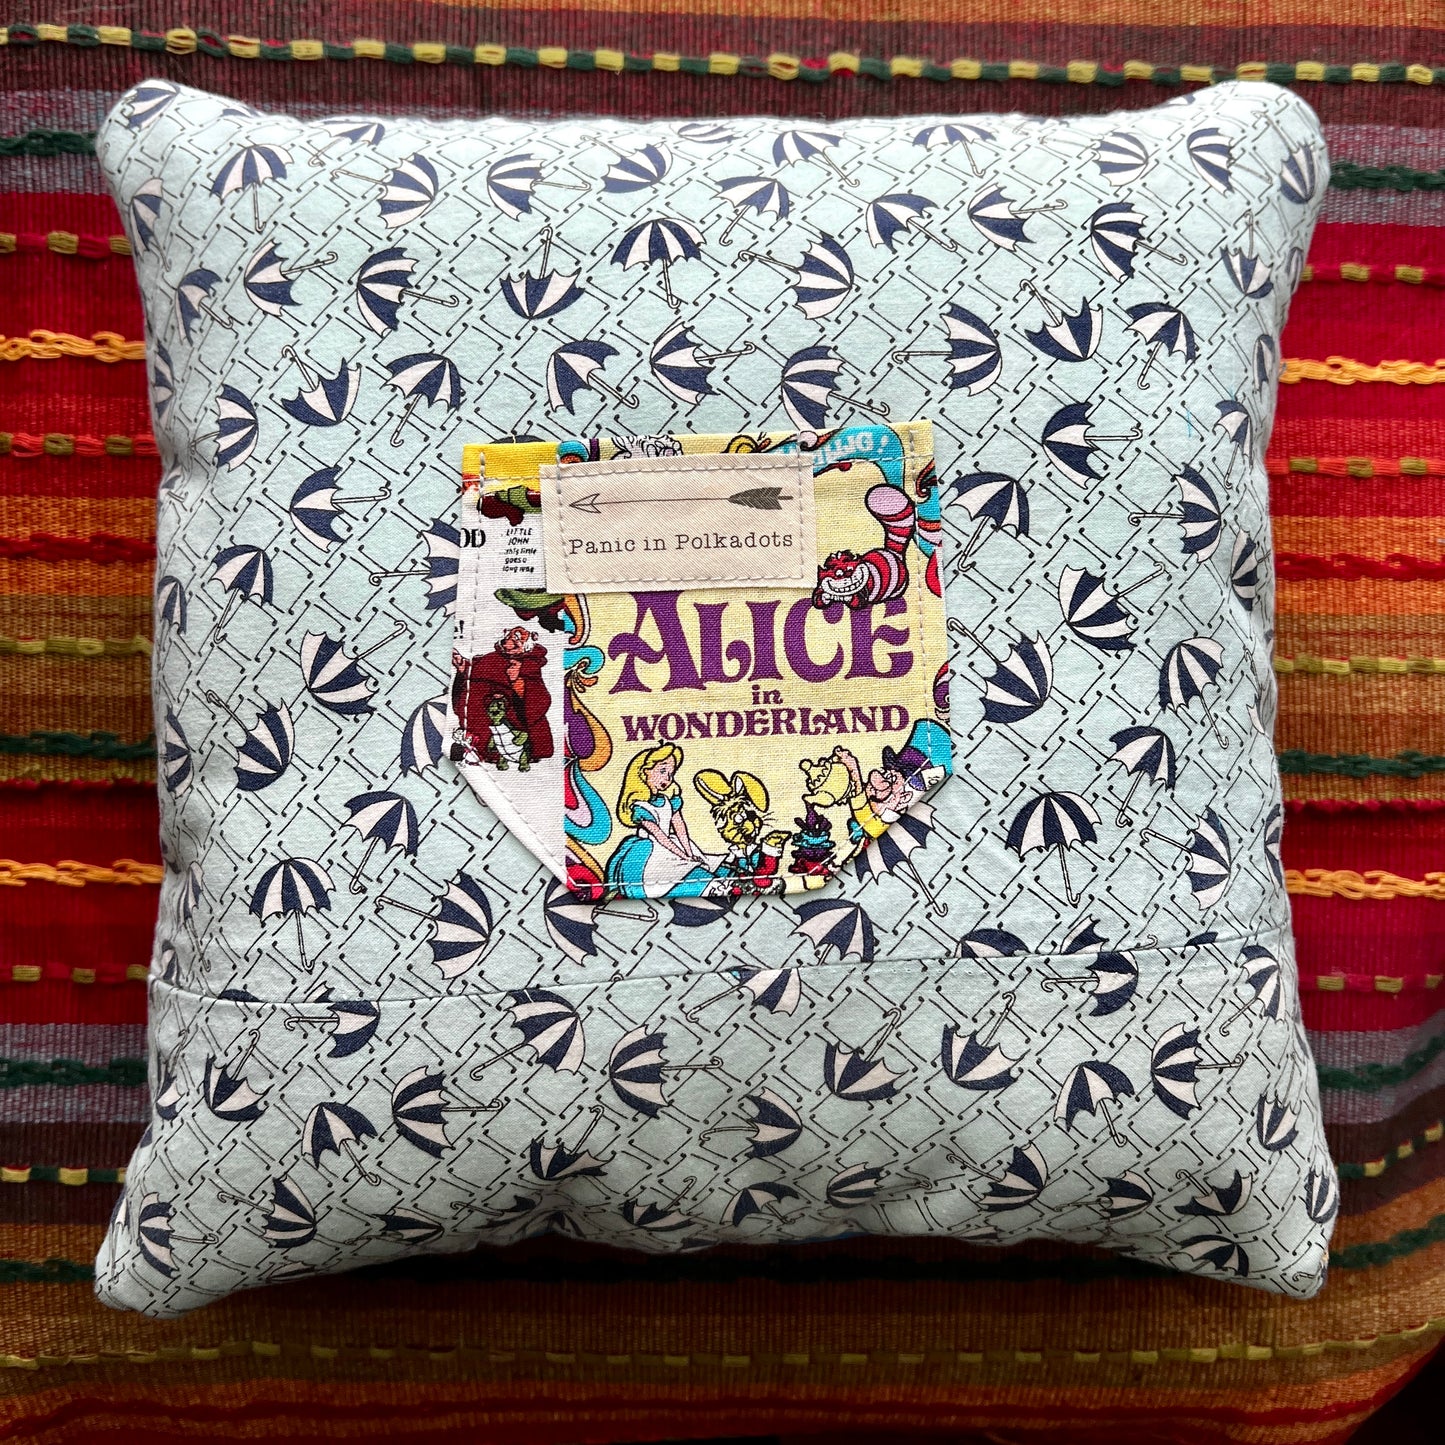 back view of alice in wonderland cathedral square pillow, with umbrellas and movie poster pocket